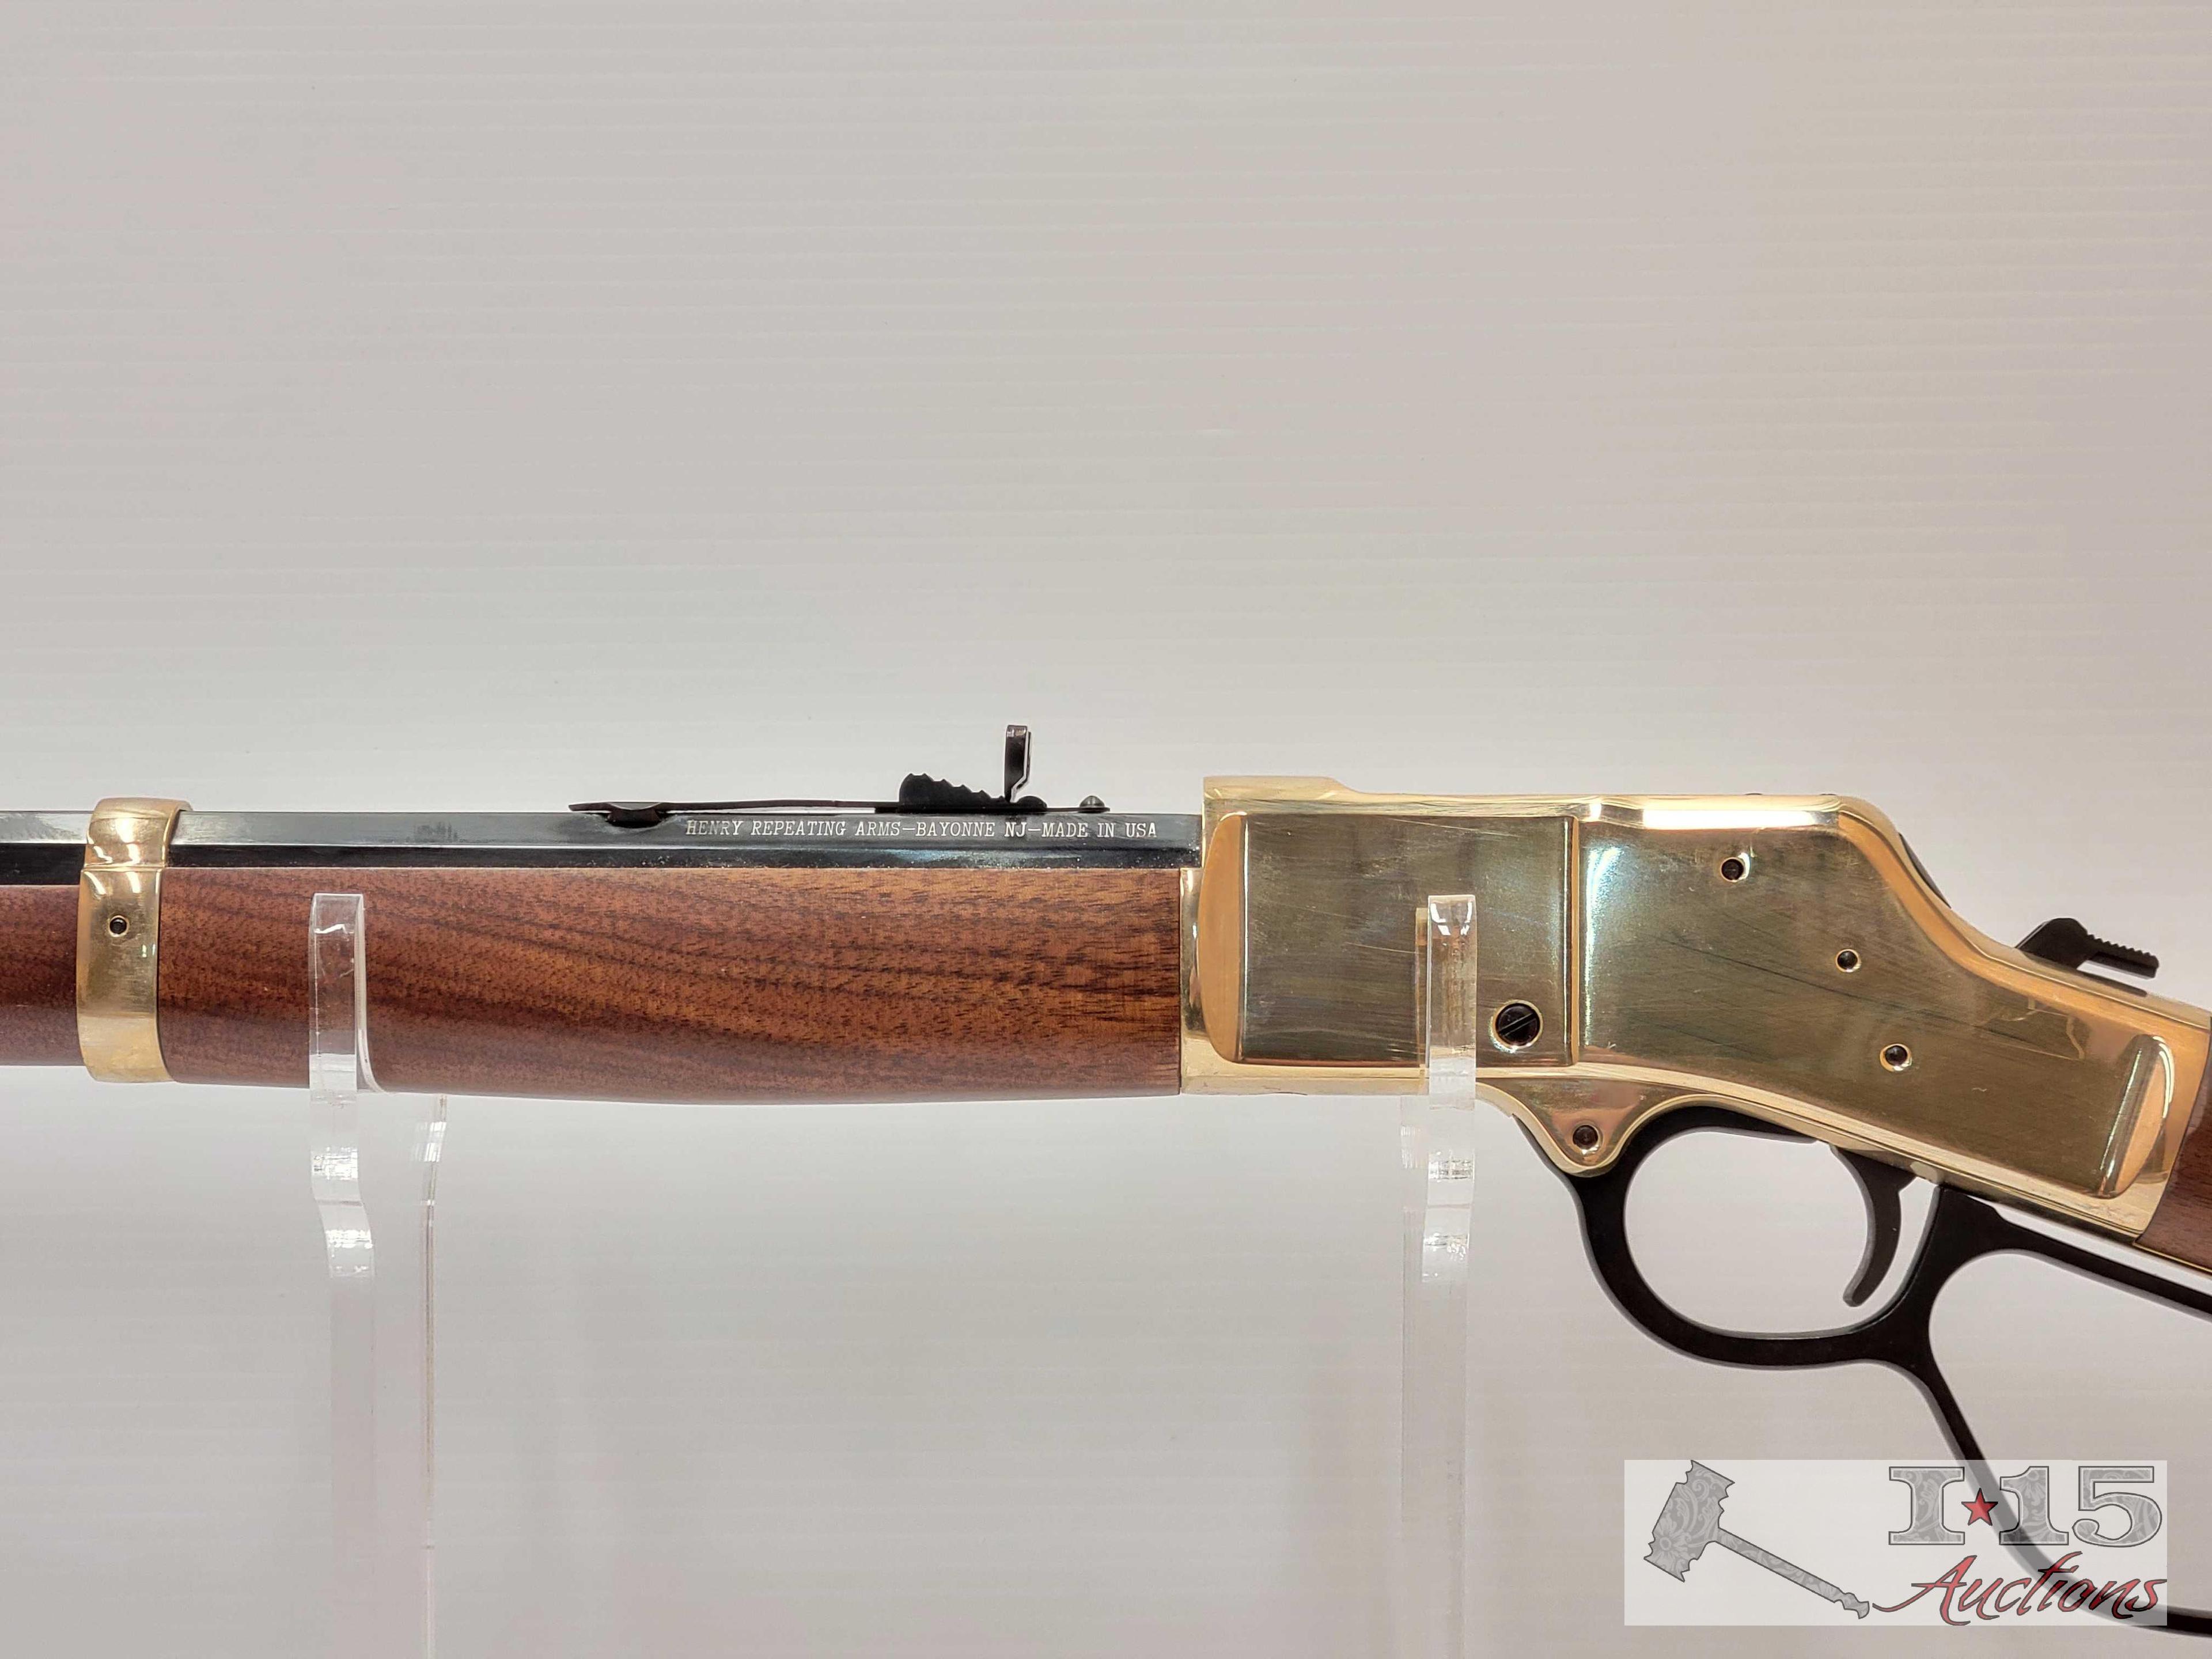 Henry Repeating Arms H006R .44Rem Mag/.44spl Lever Action Rifle